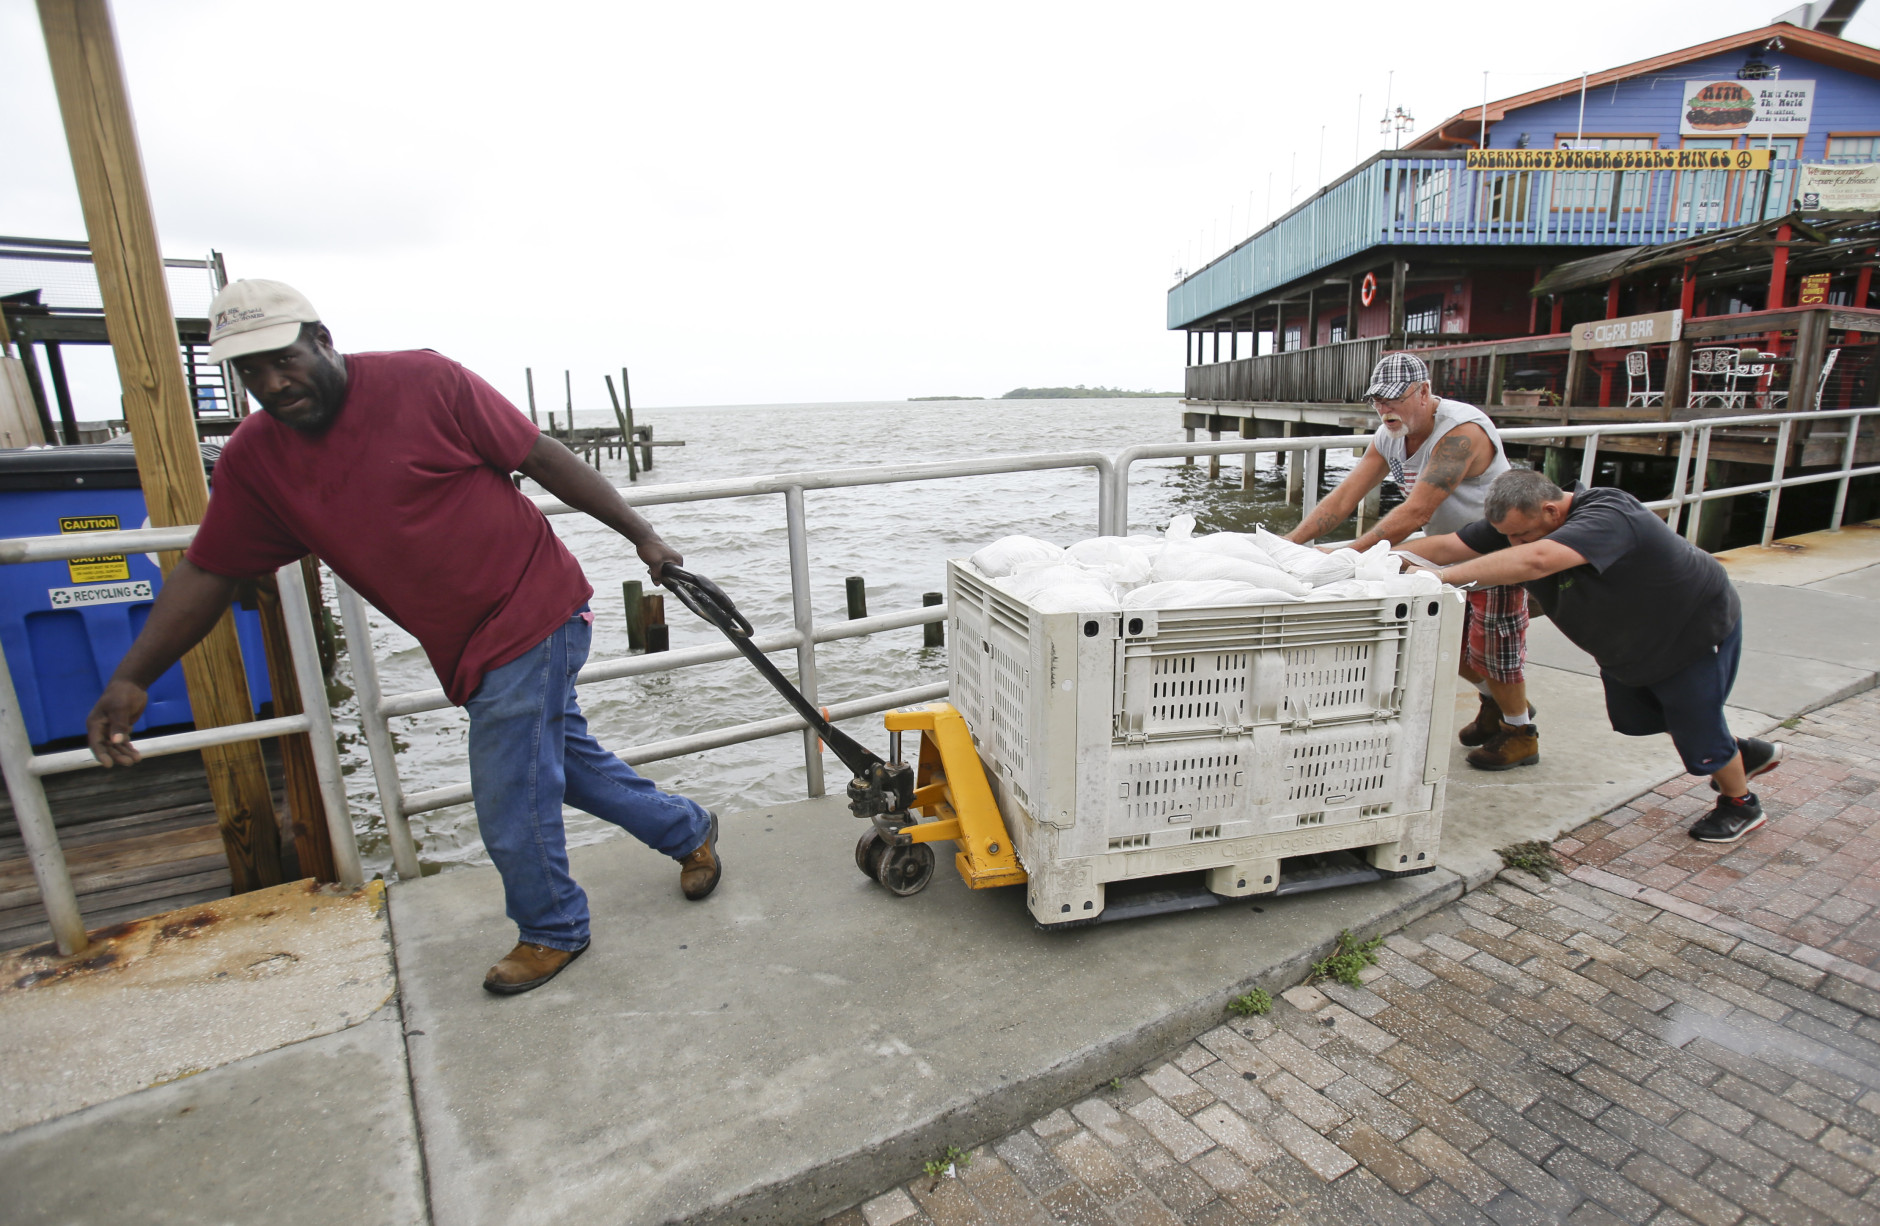 Workers move sandbags to protect a restaurant in preperation for Tropical Storm Hermine Wednesday, Aug. 31, 2016, in Cedar Key, Fla. Forecasters say Hermine could be near hurricane strength by Thursday night as it approaches the Gulf Coast. (AP Photo/John Raoux)